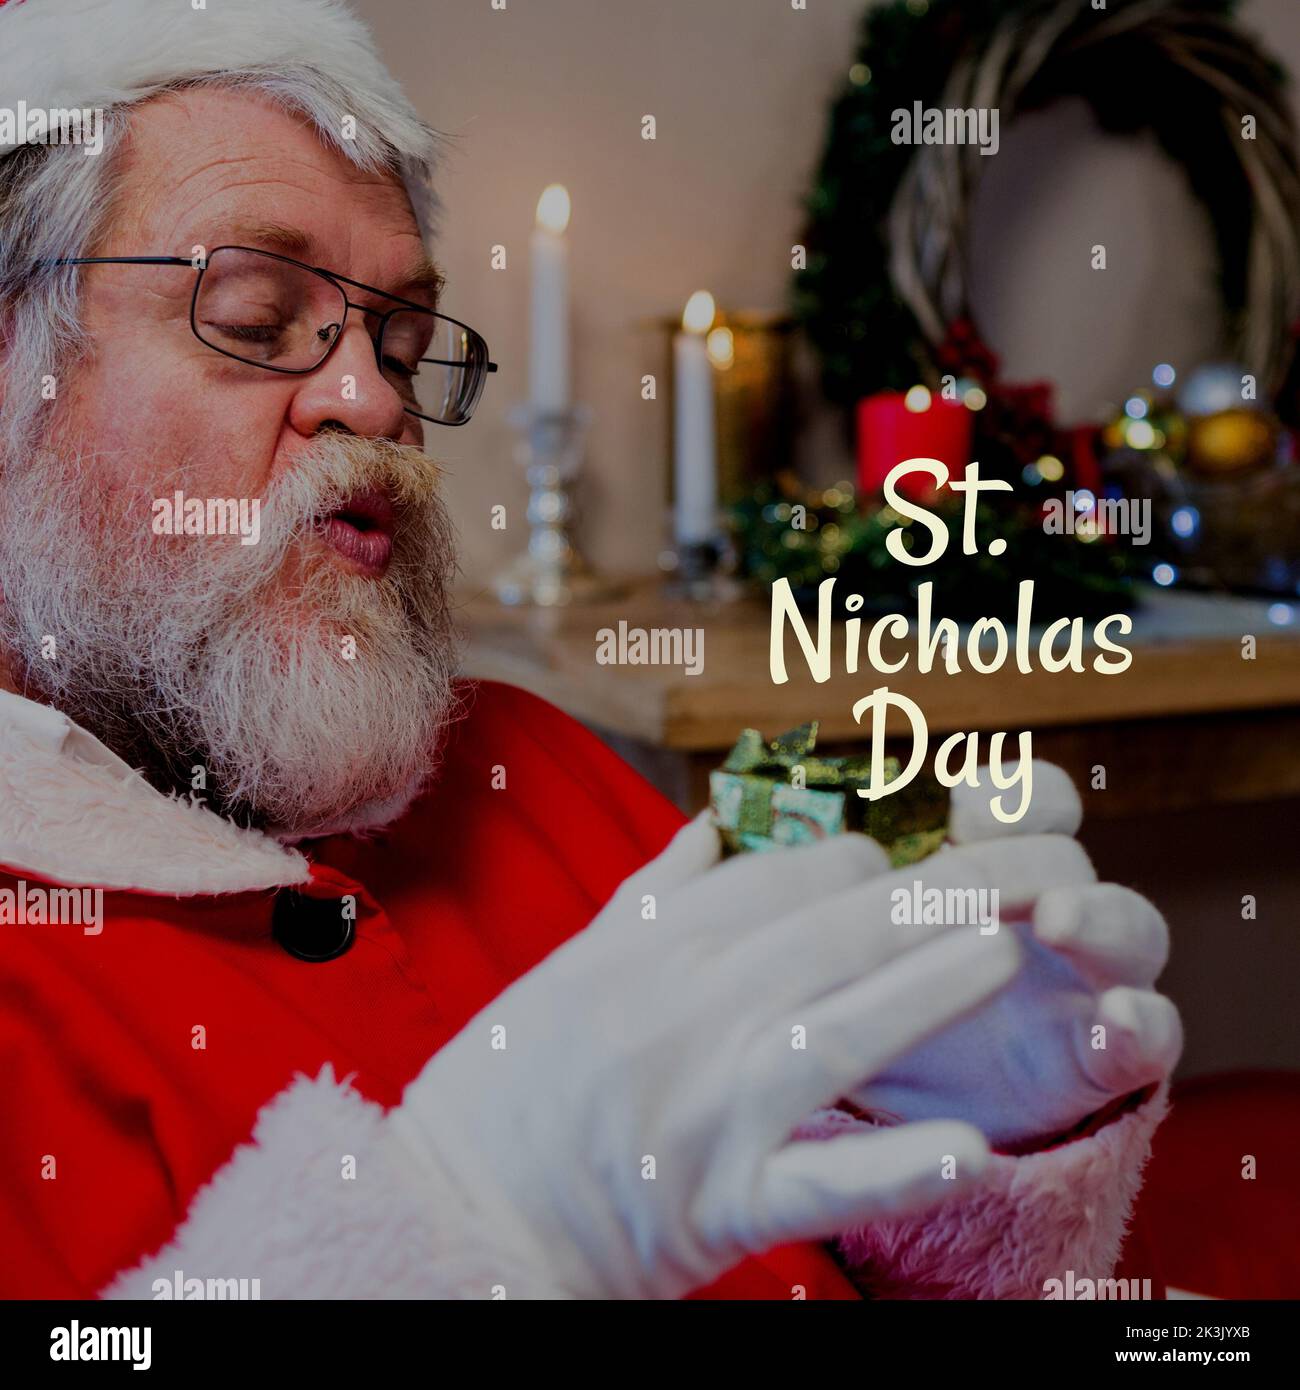 Composition of st nicholas day text over santa claus holding present Stock Photo